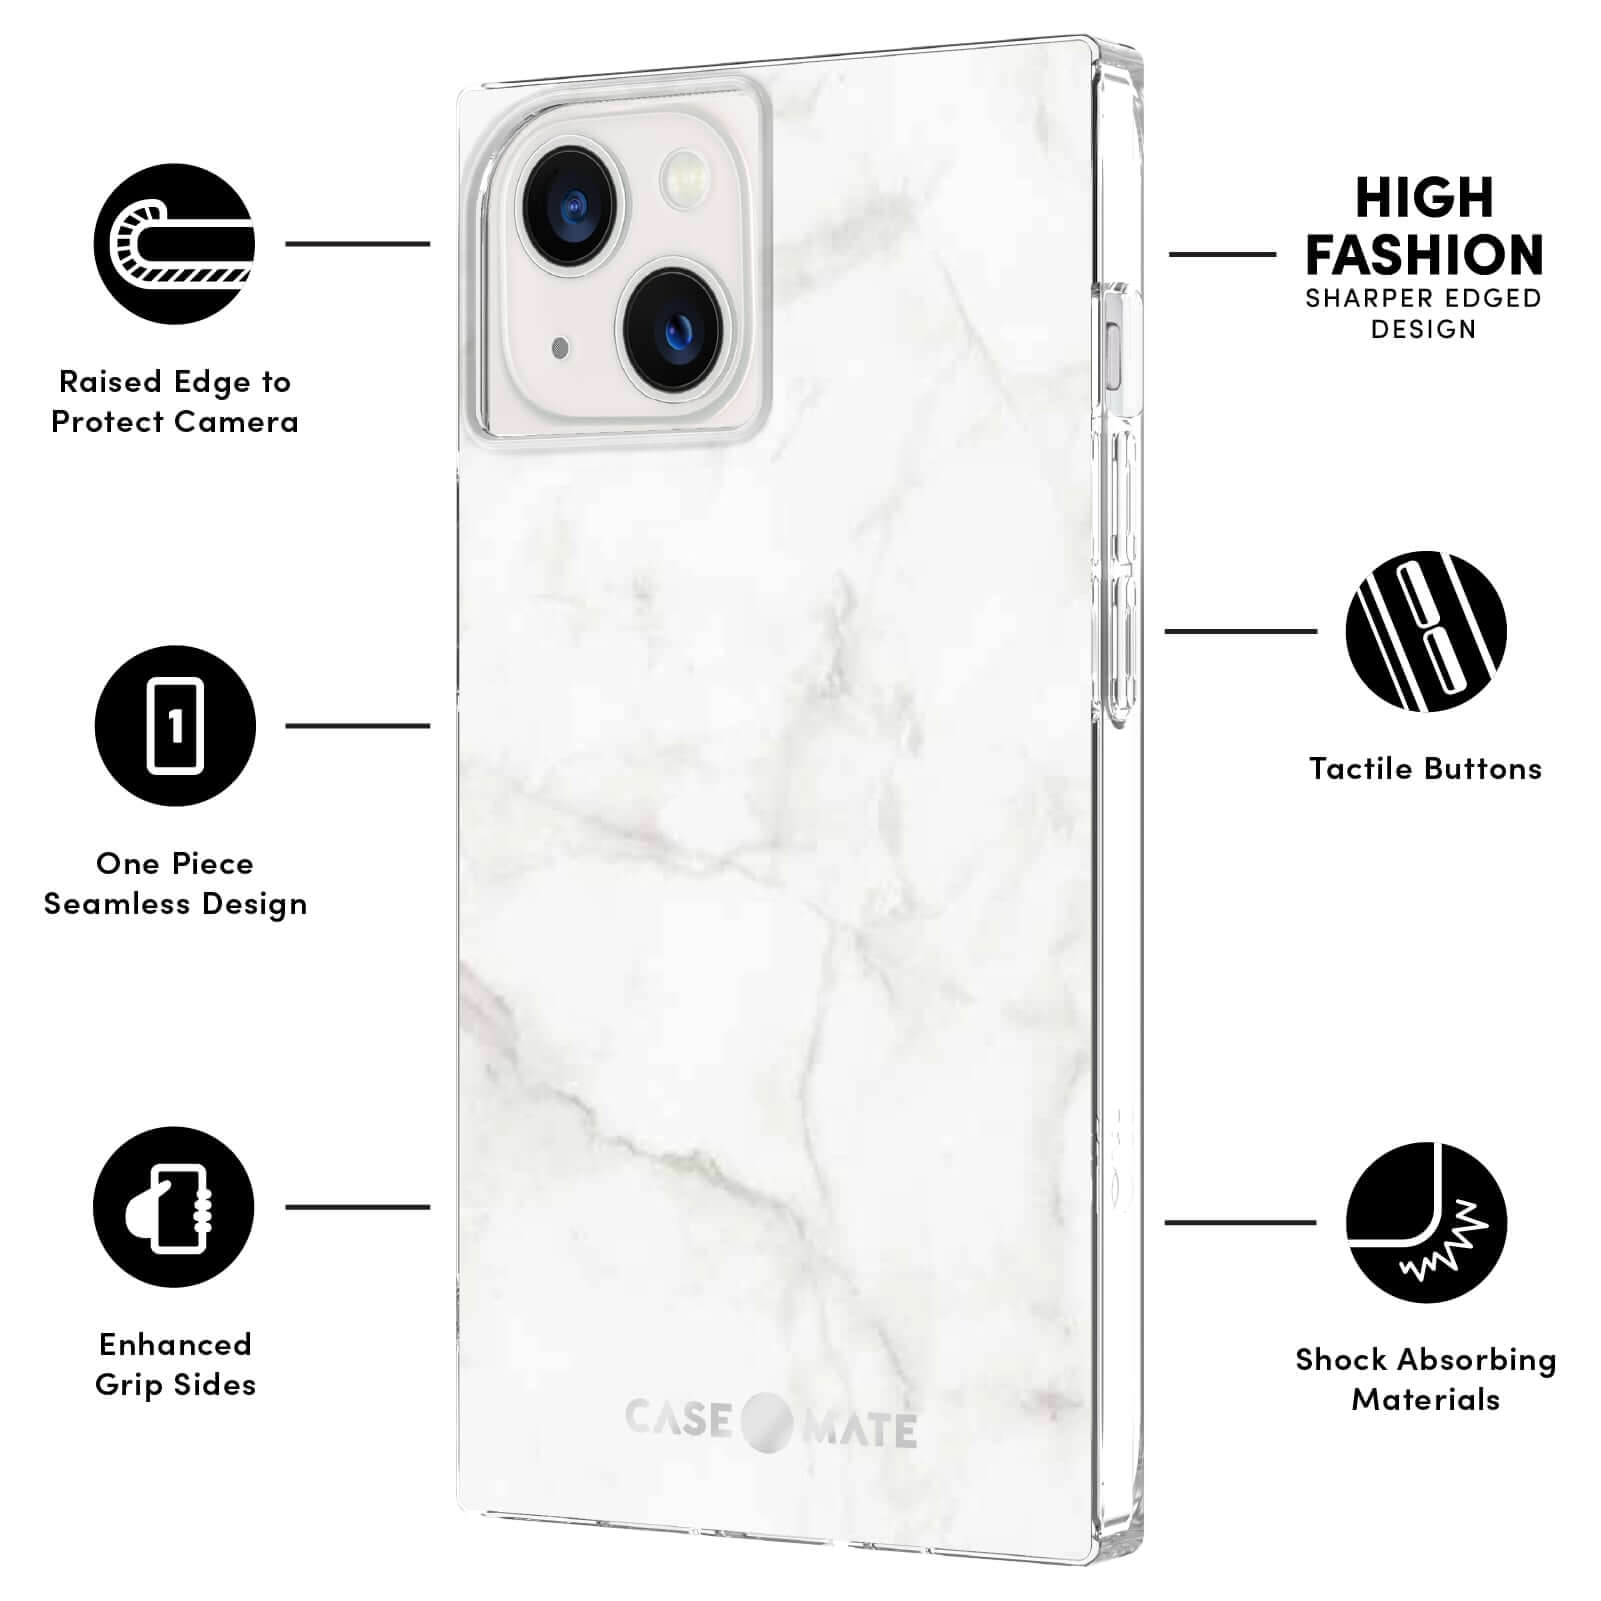 FEATURES: RAISED EDGE TO PROTECT CAMERA, ONE PIECE SEAMLESS DESIGN, ENHANCED GRIP SIDES, HIGH FASHION SHARPER EDGE DESIGN, TACTILE BUTTONS, SHOCK ABSORBING MATERIALS. COLOR::WHITE MARBLE